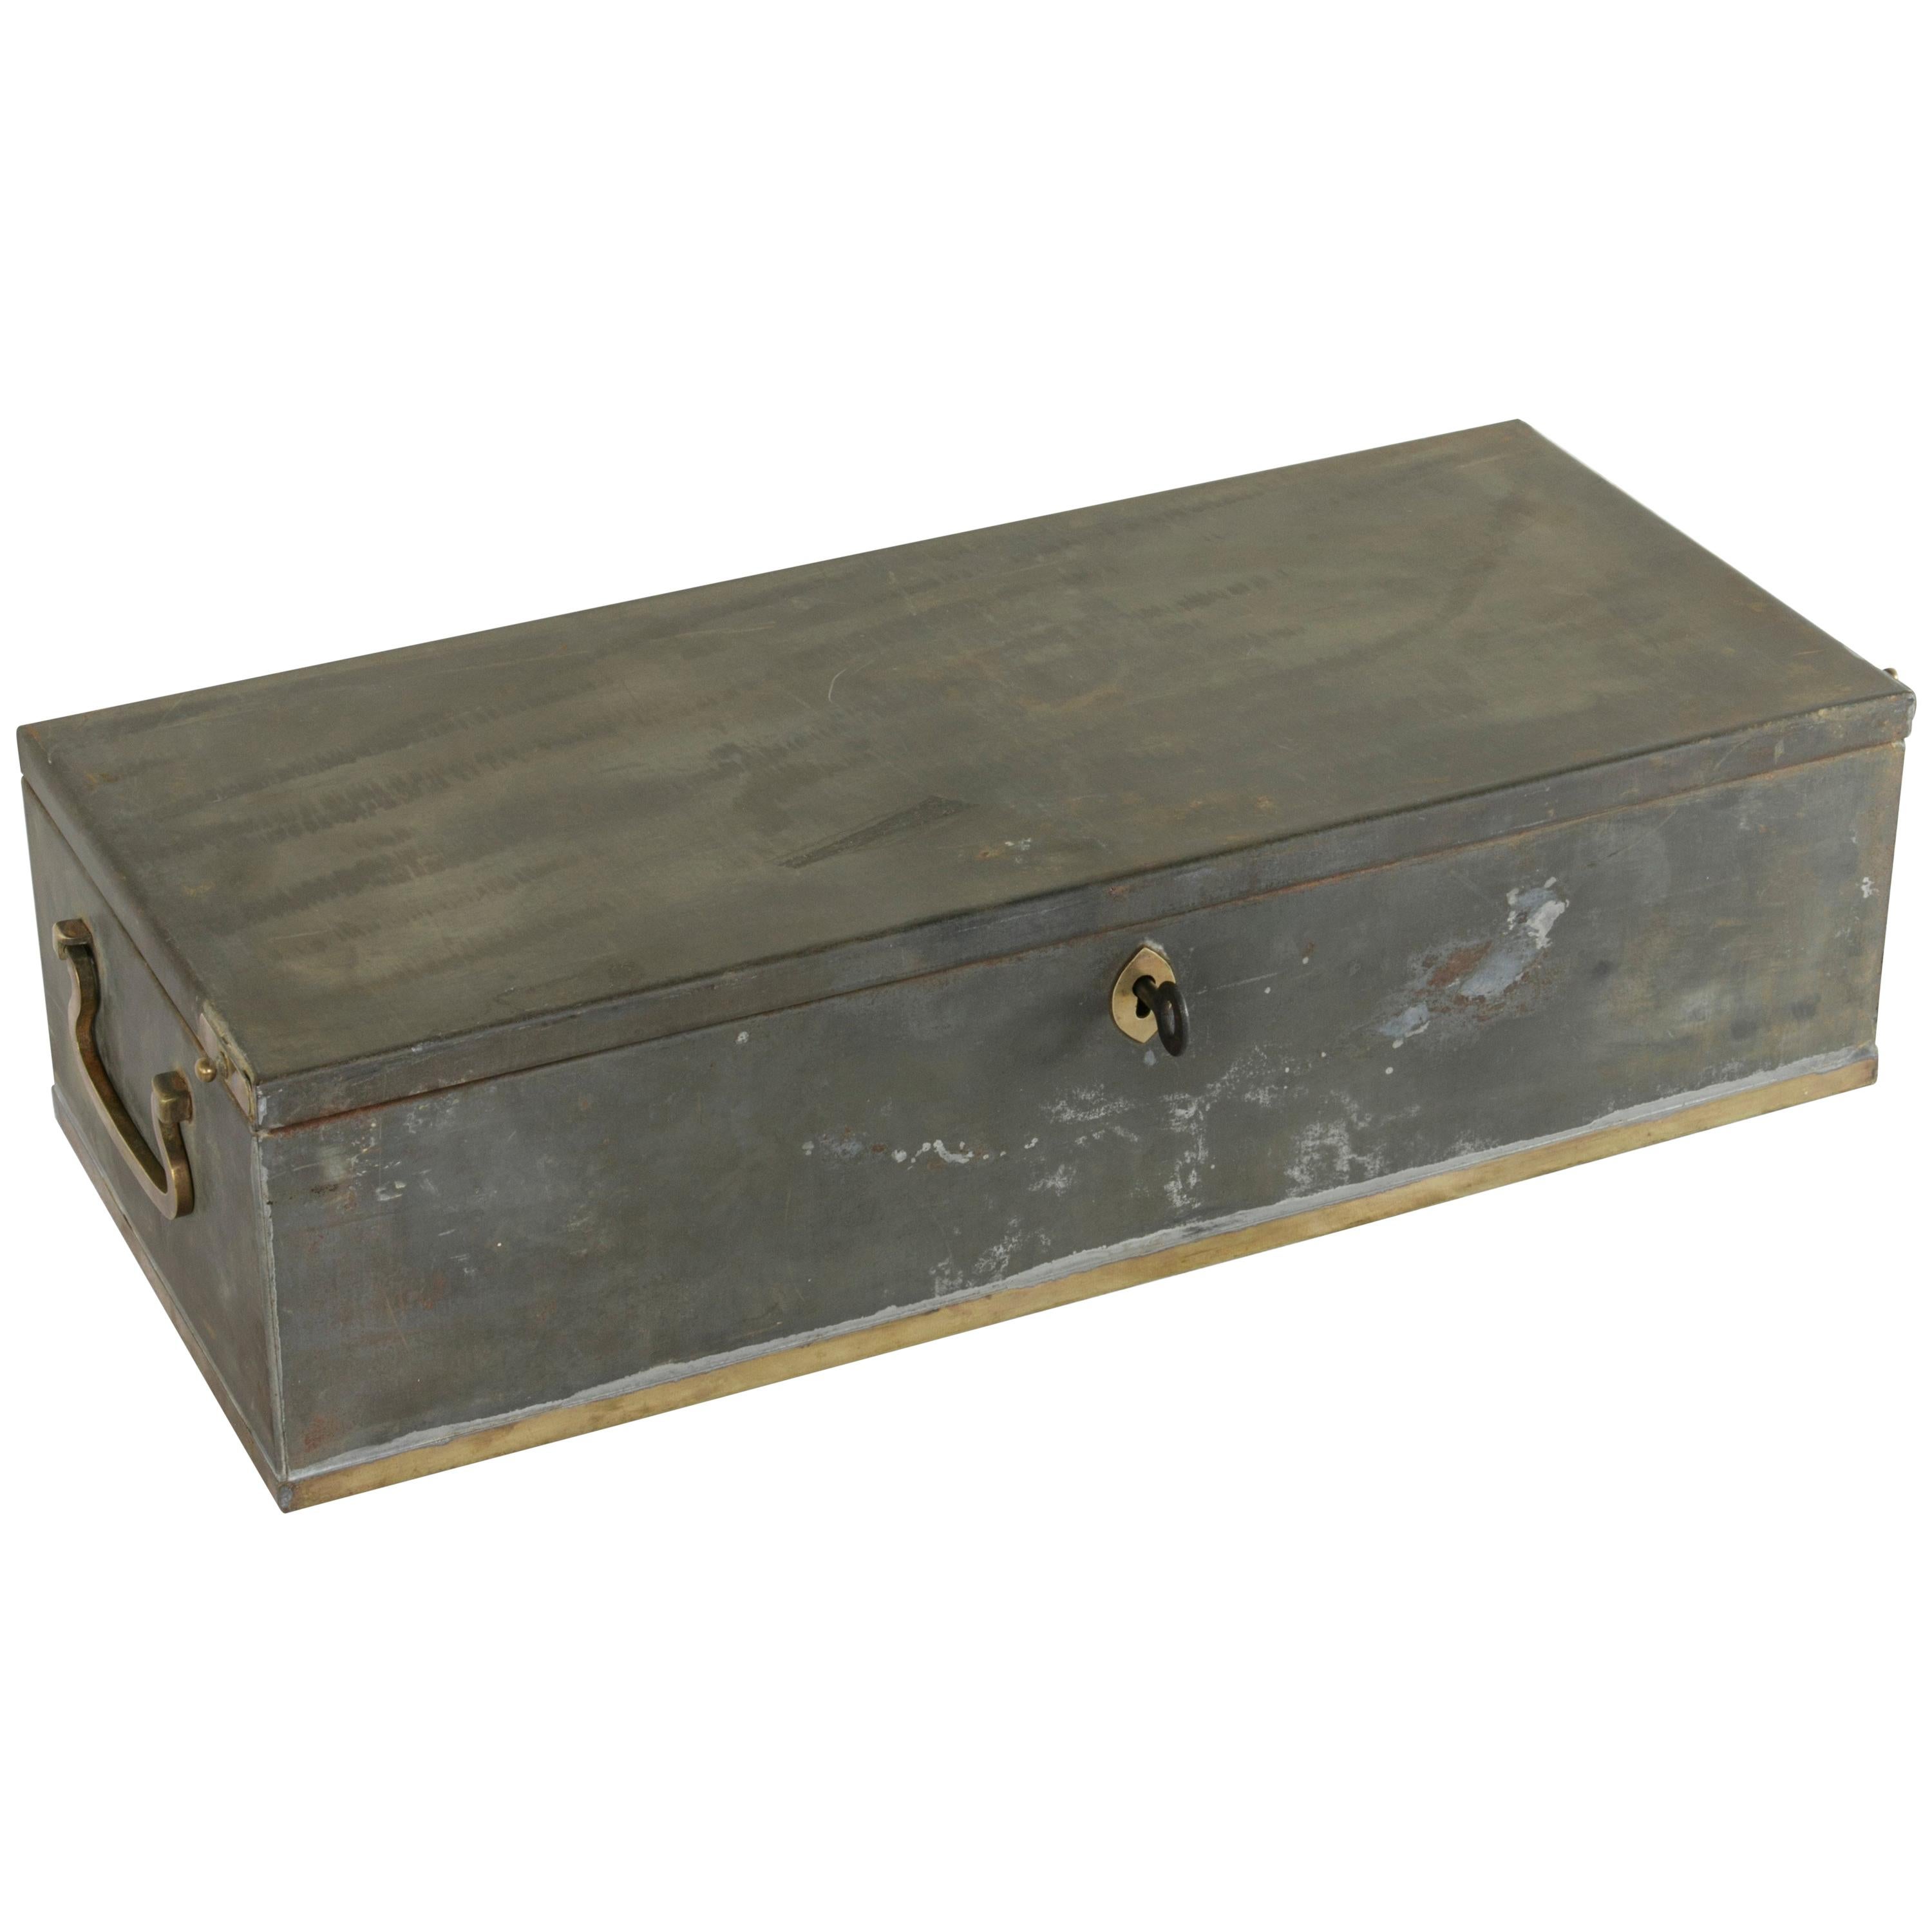 Early 20th Century Steel and Brass Lock Box from the Banco Central in Barcelona